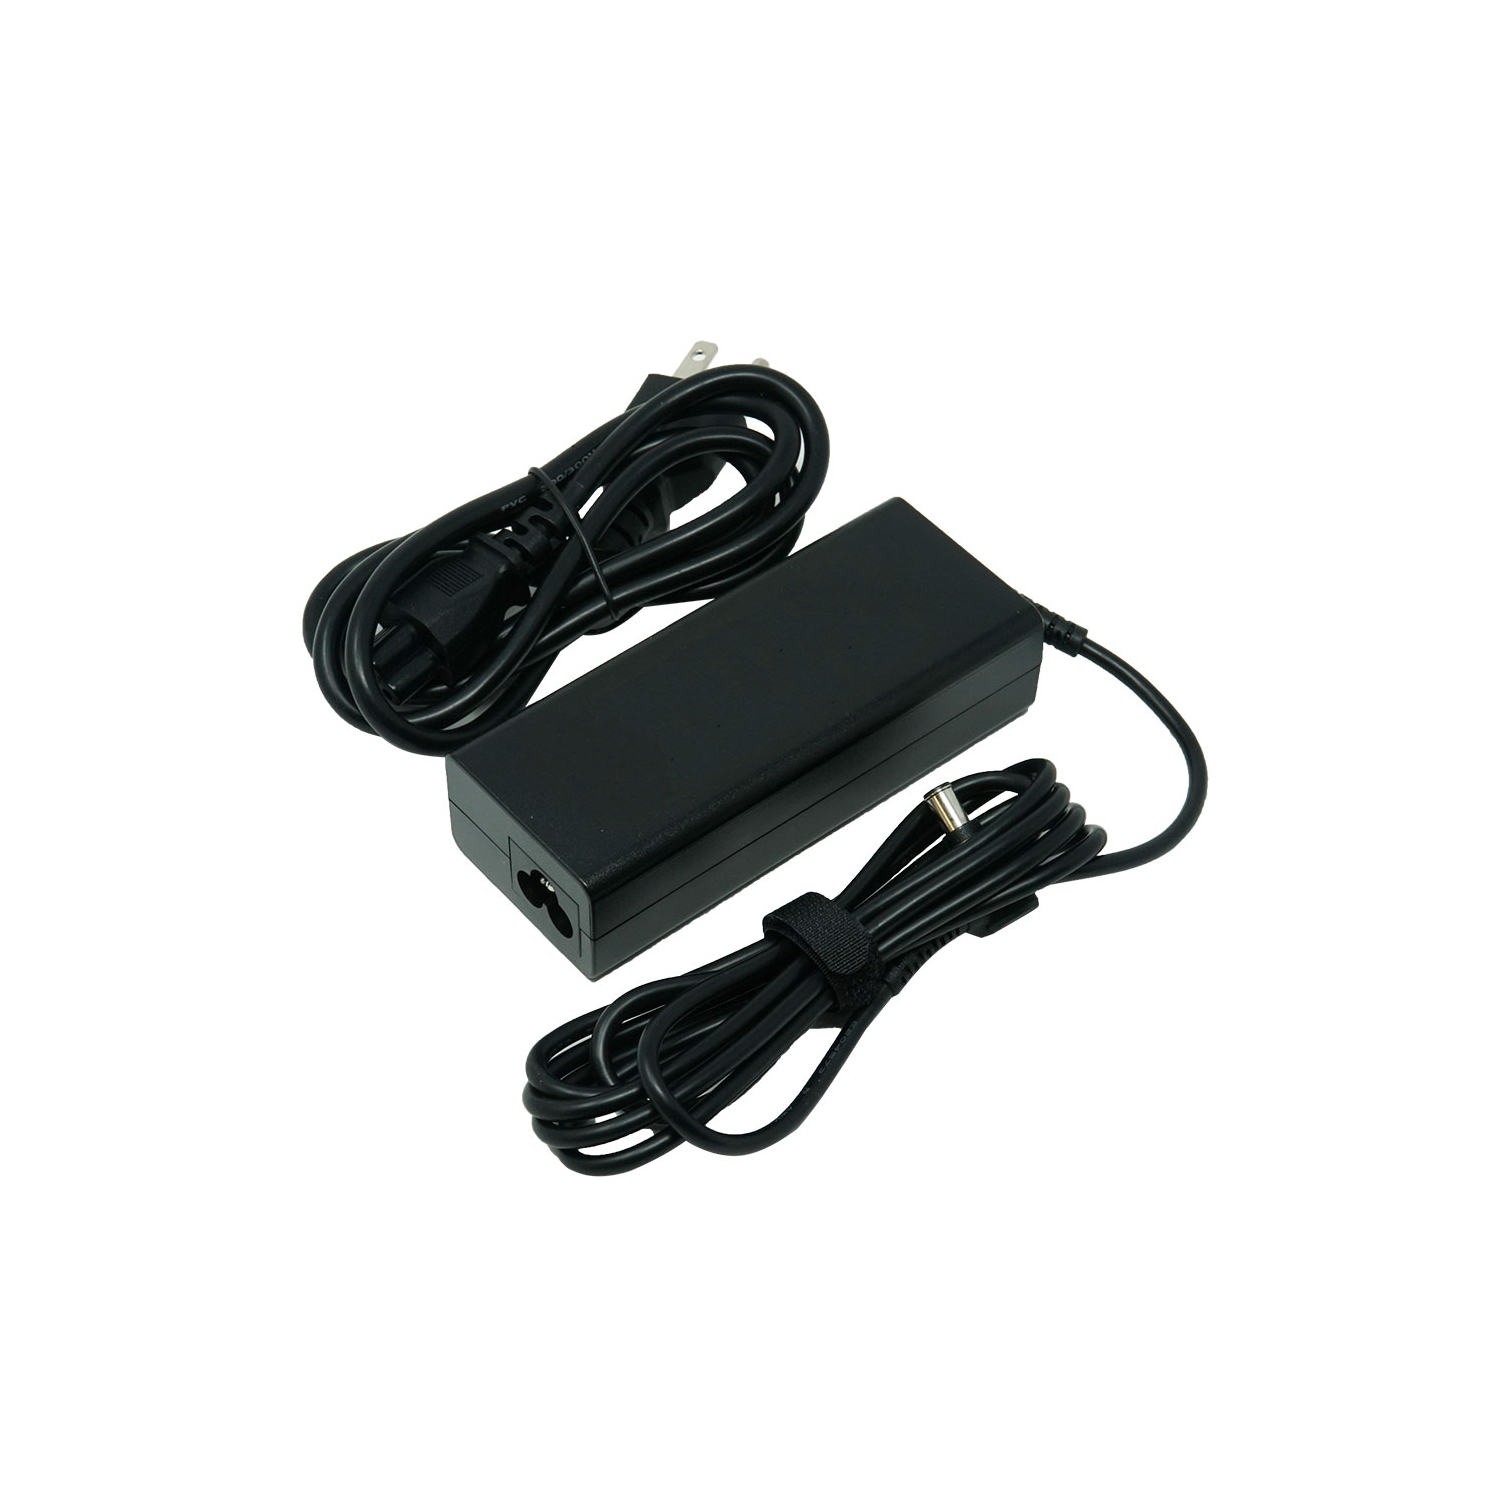 Dr. Battery - Notebook Adapter for LG Widebook P430-K / R480 / R490 / R510 / PCGA-AC19V12 / PCGA-AC19V13 - Free Shipping